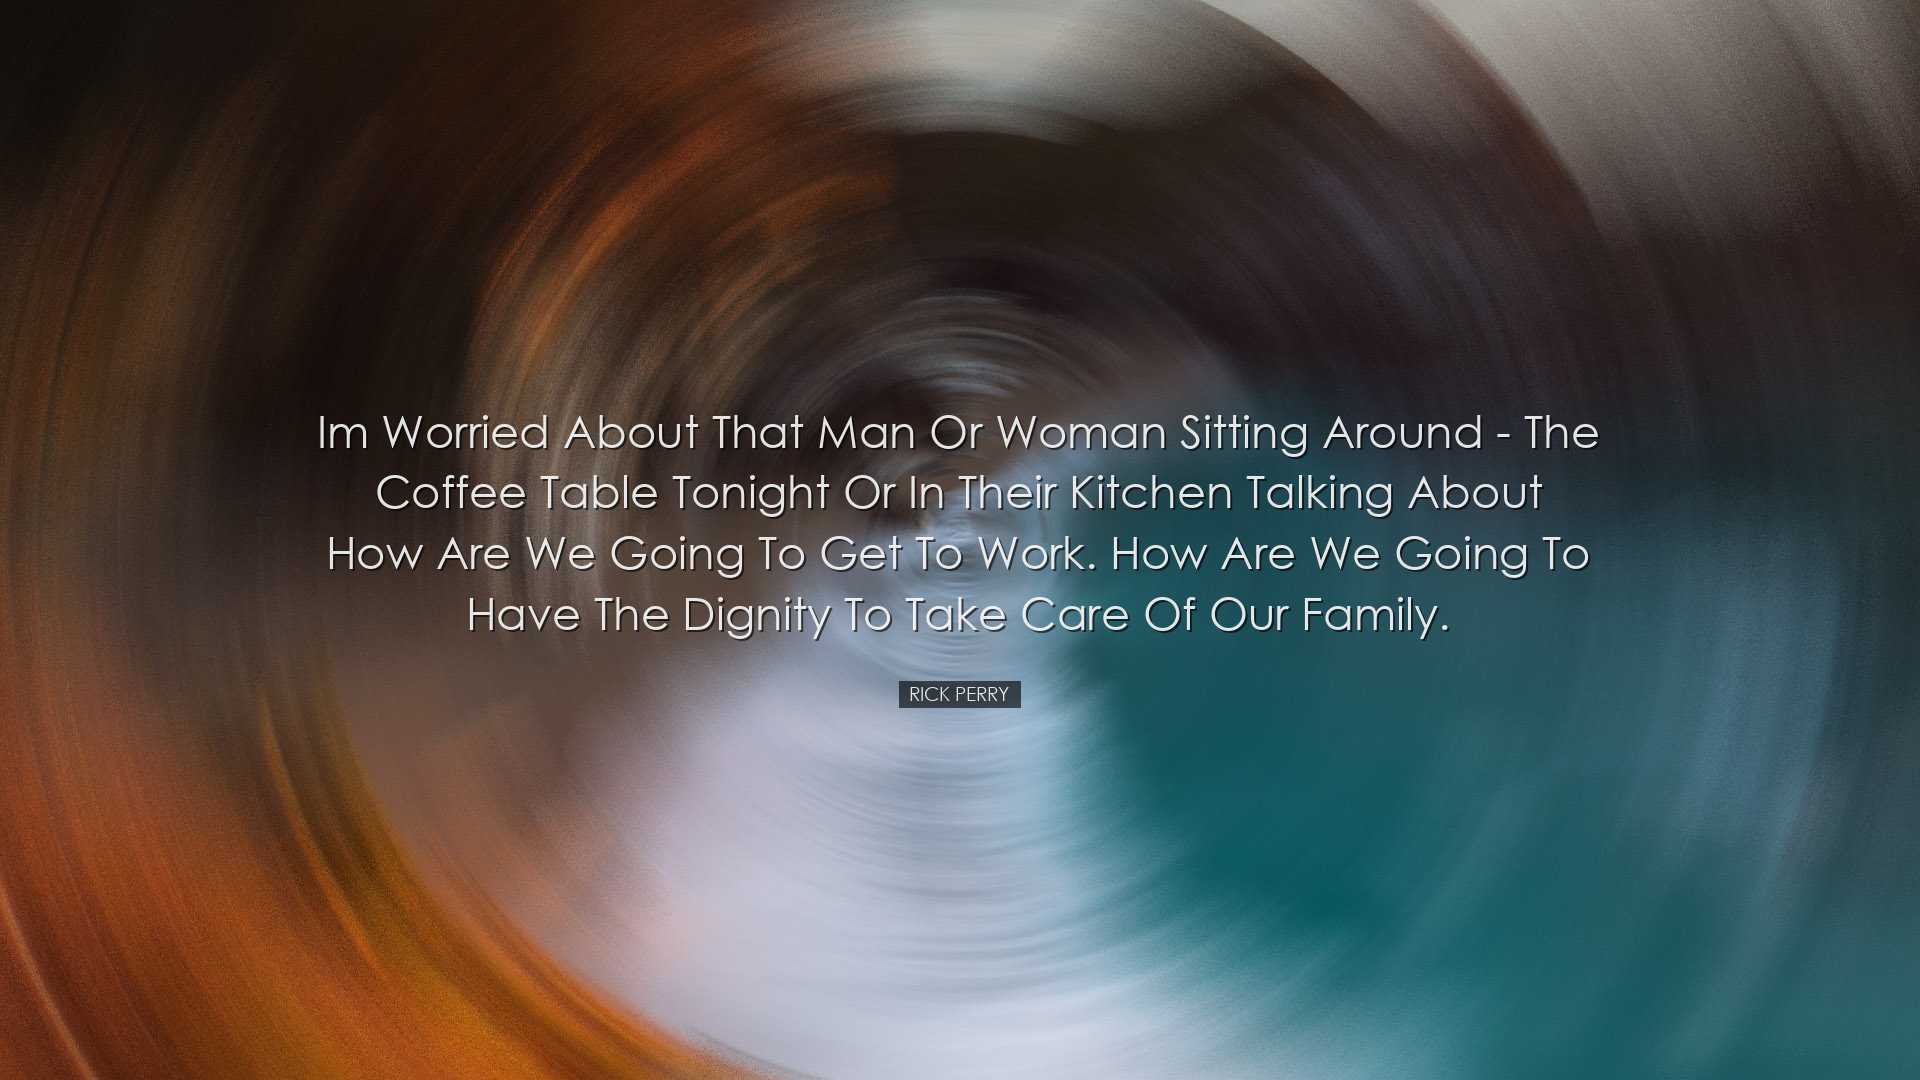 Im worried about that man or woman sitting around - the coffee tab